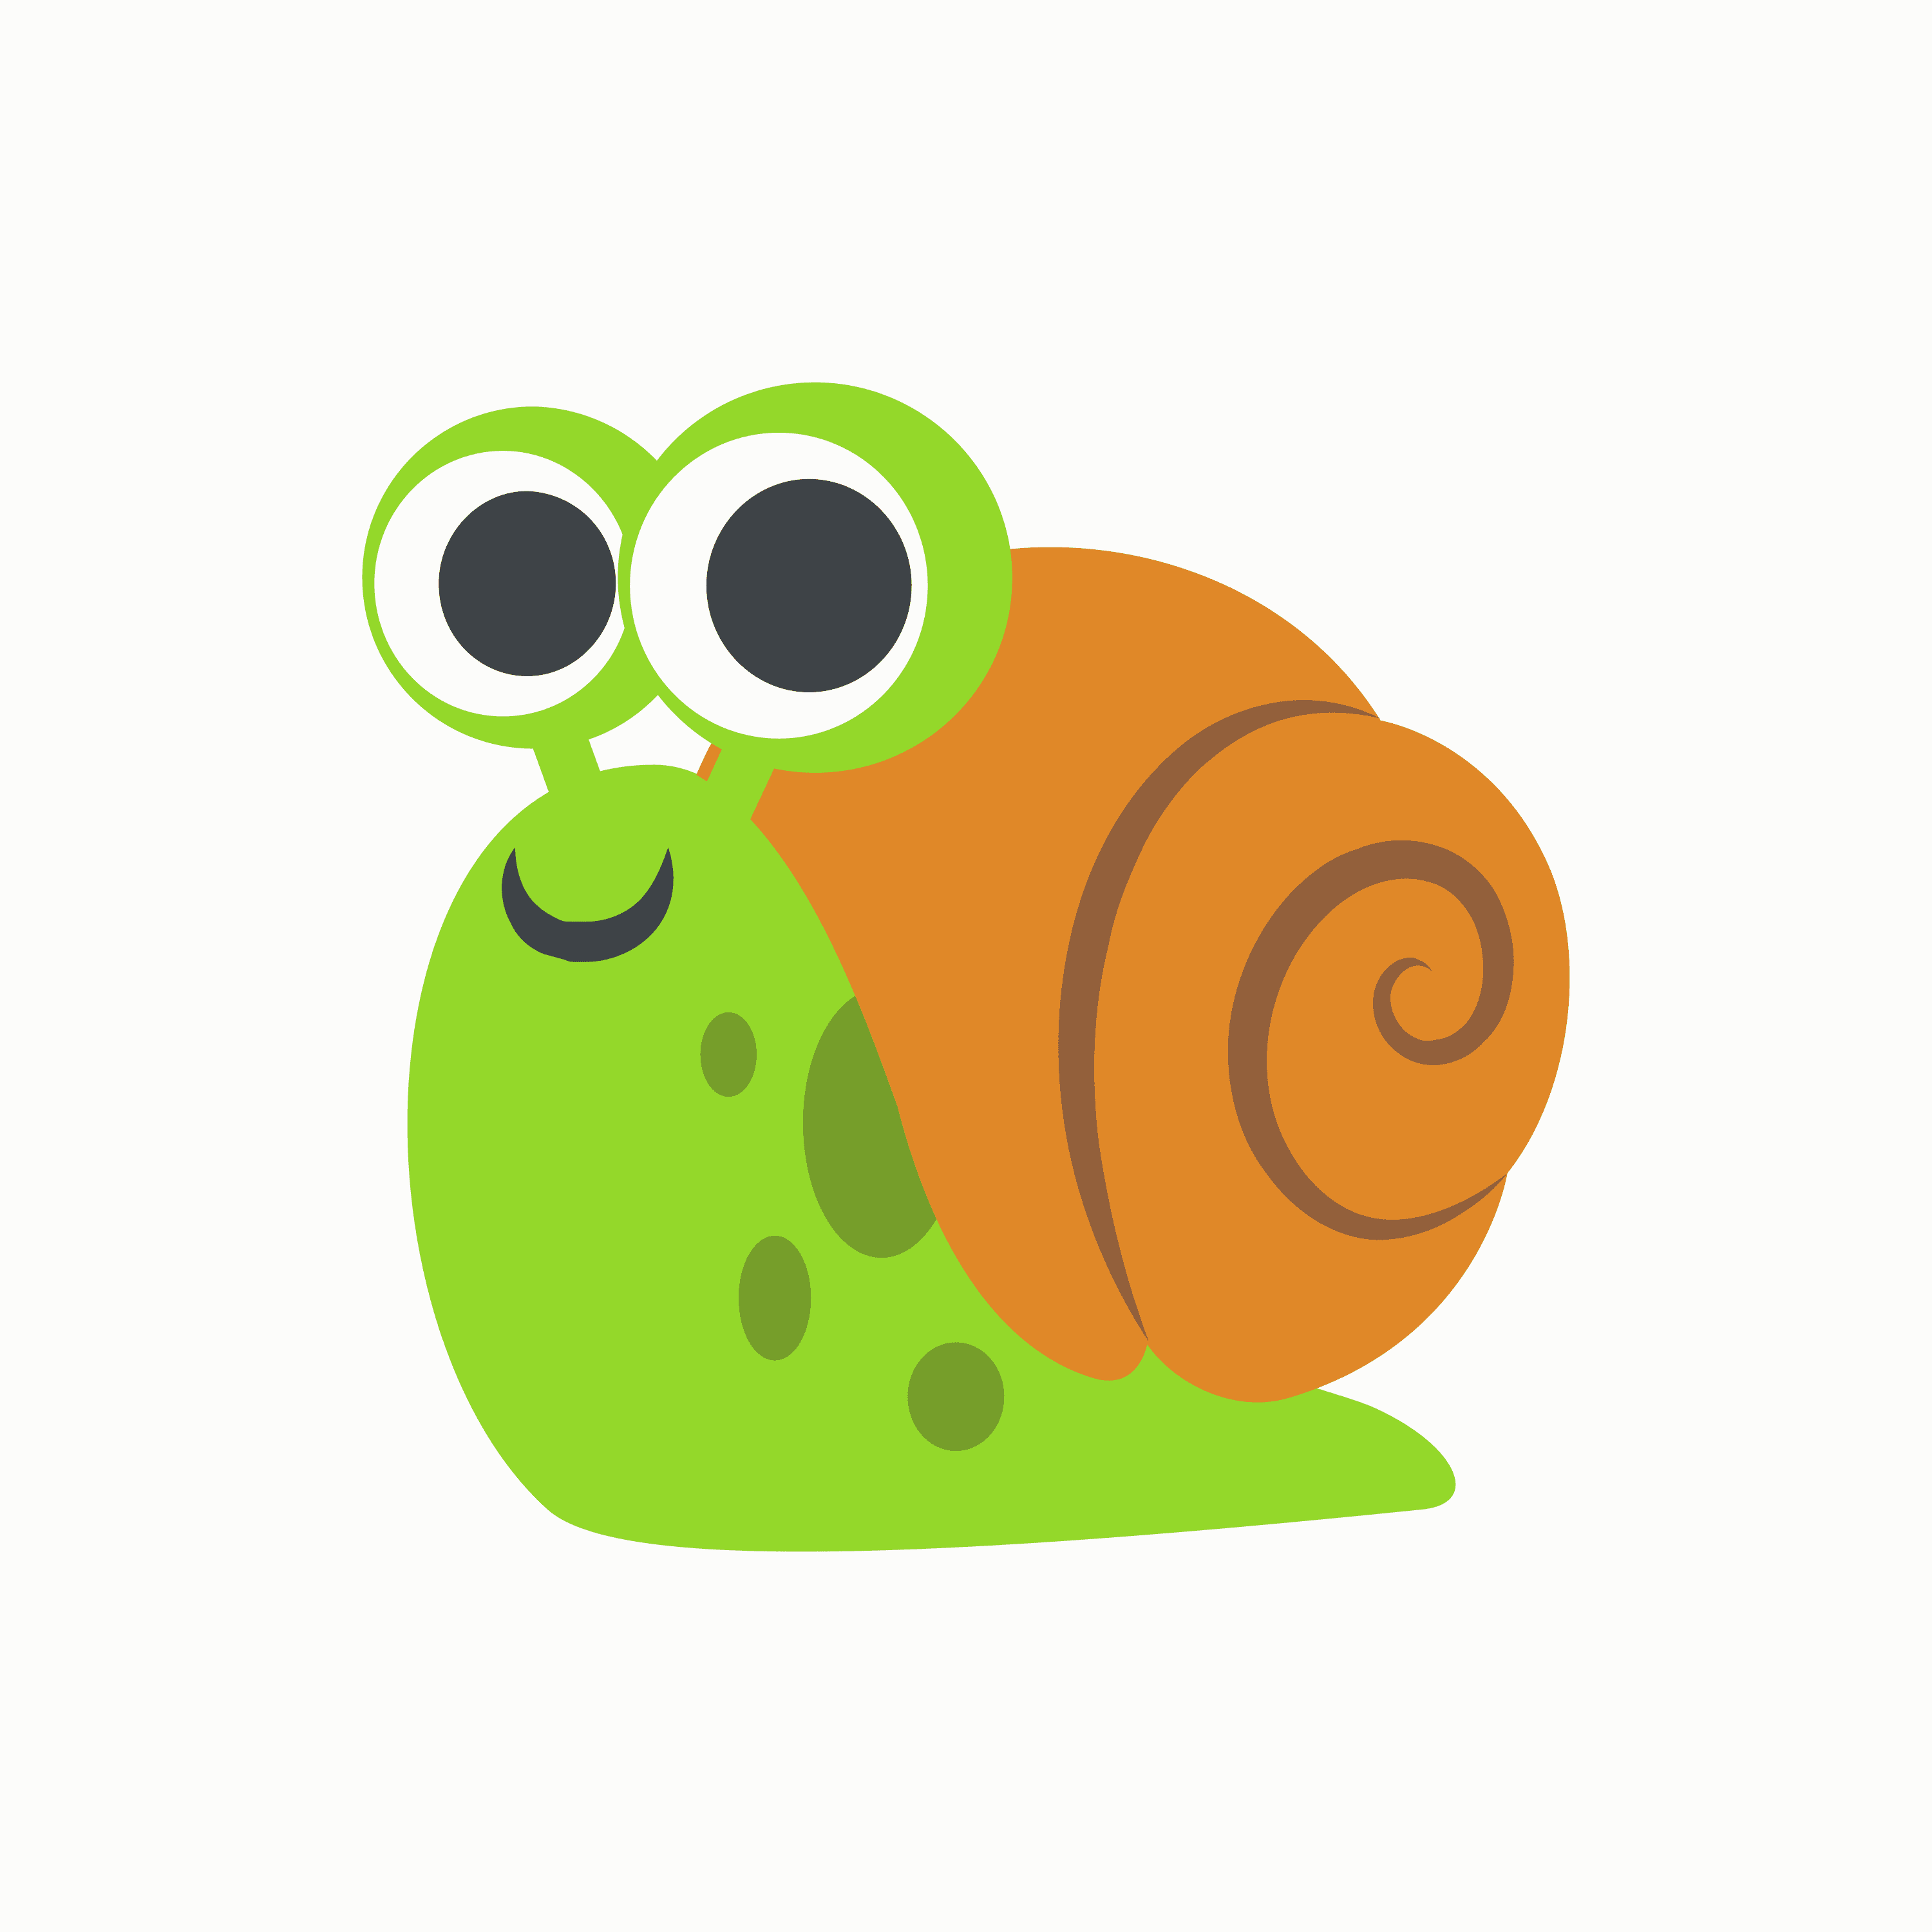 Official Snaily